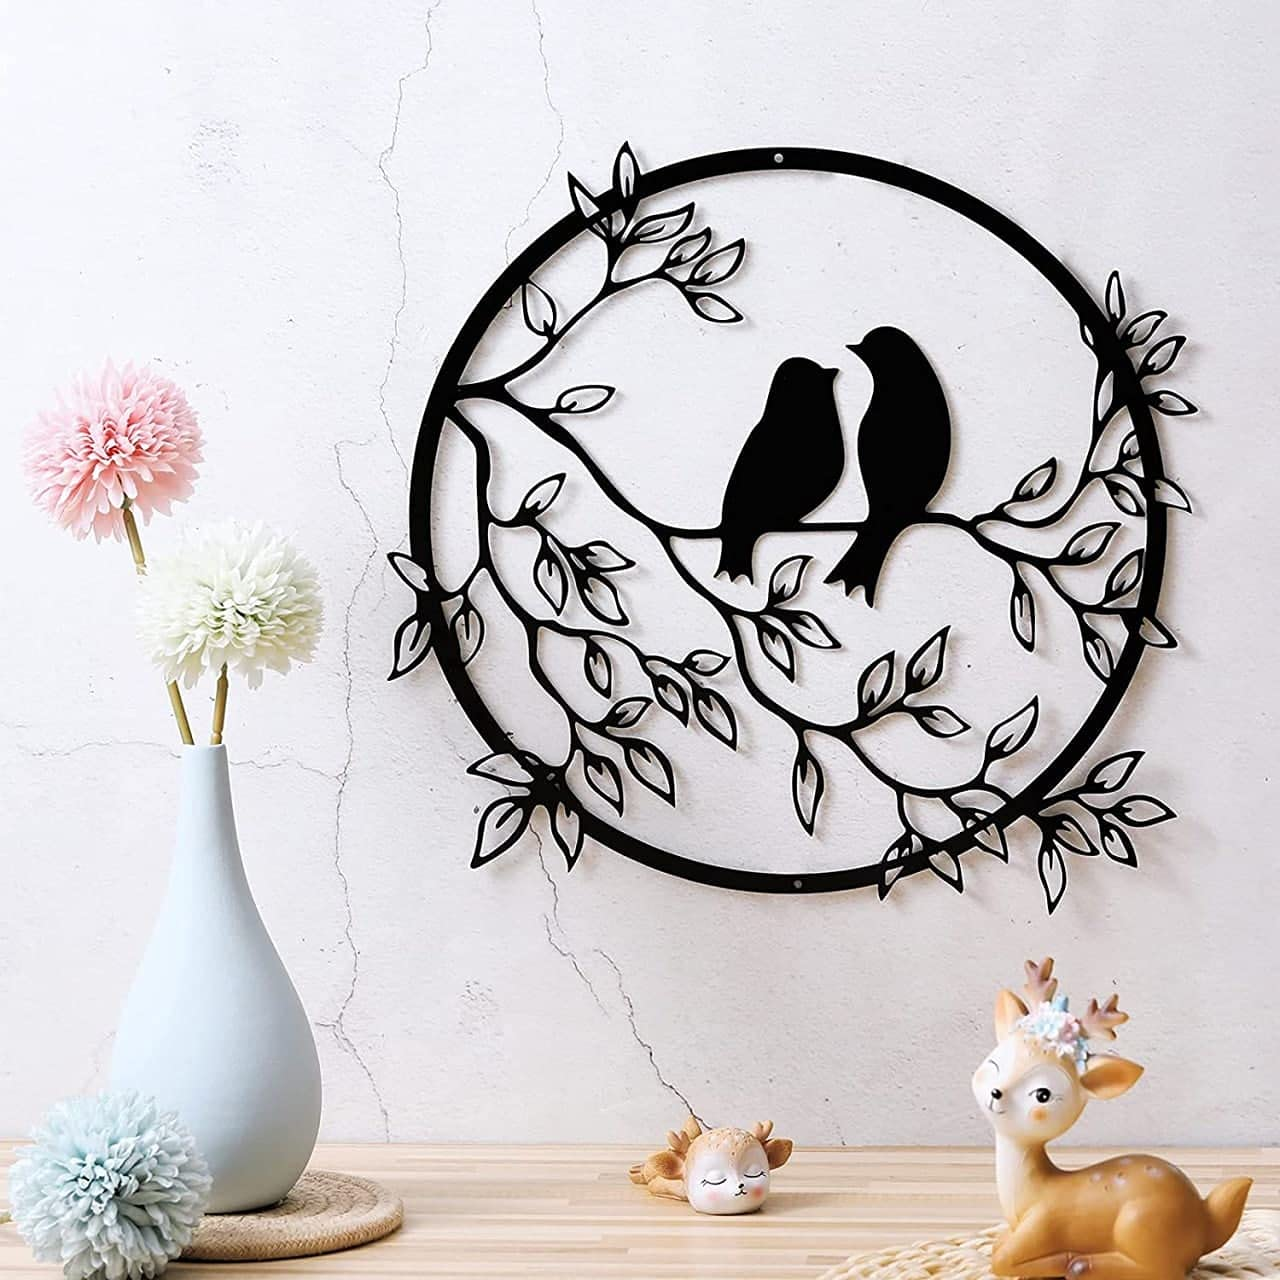 Wooden Birds in Love Wall Decoration